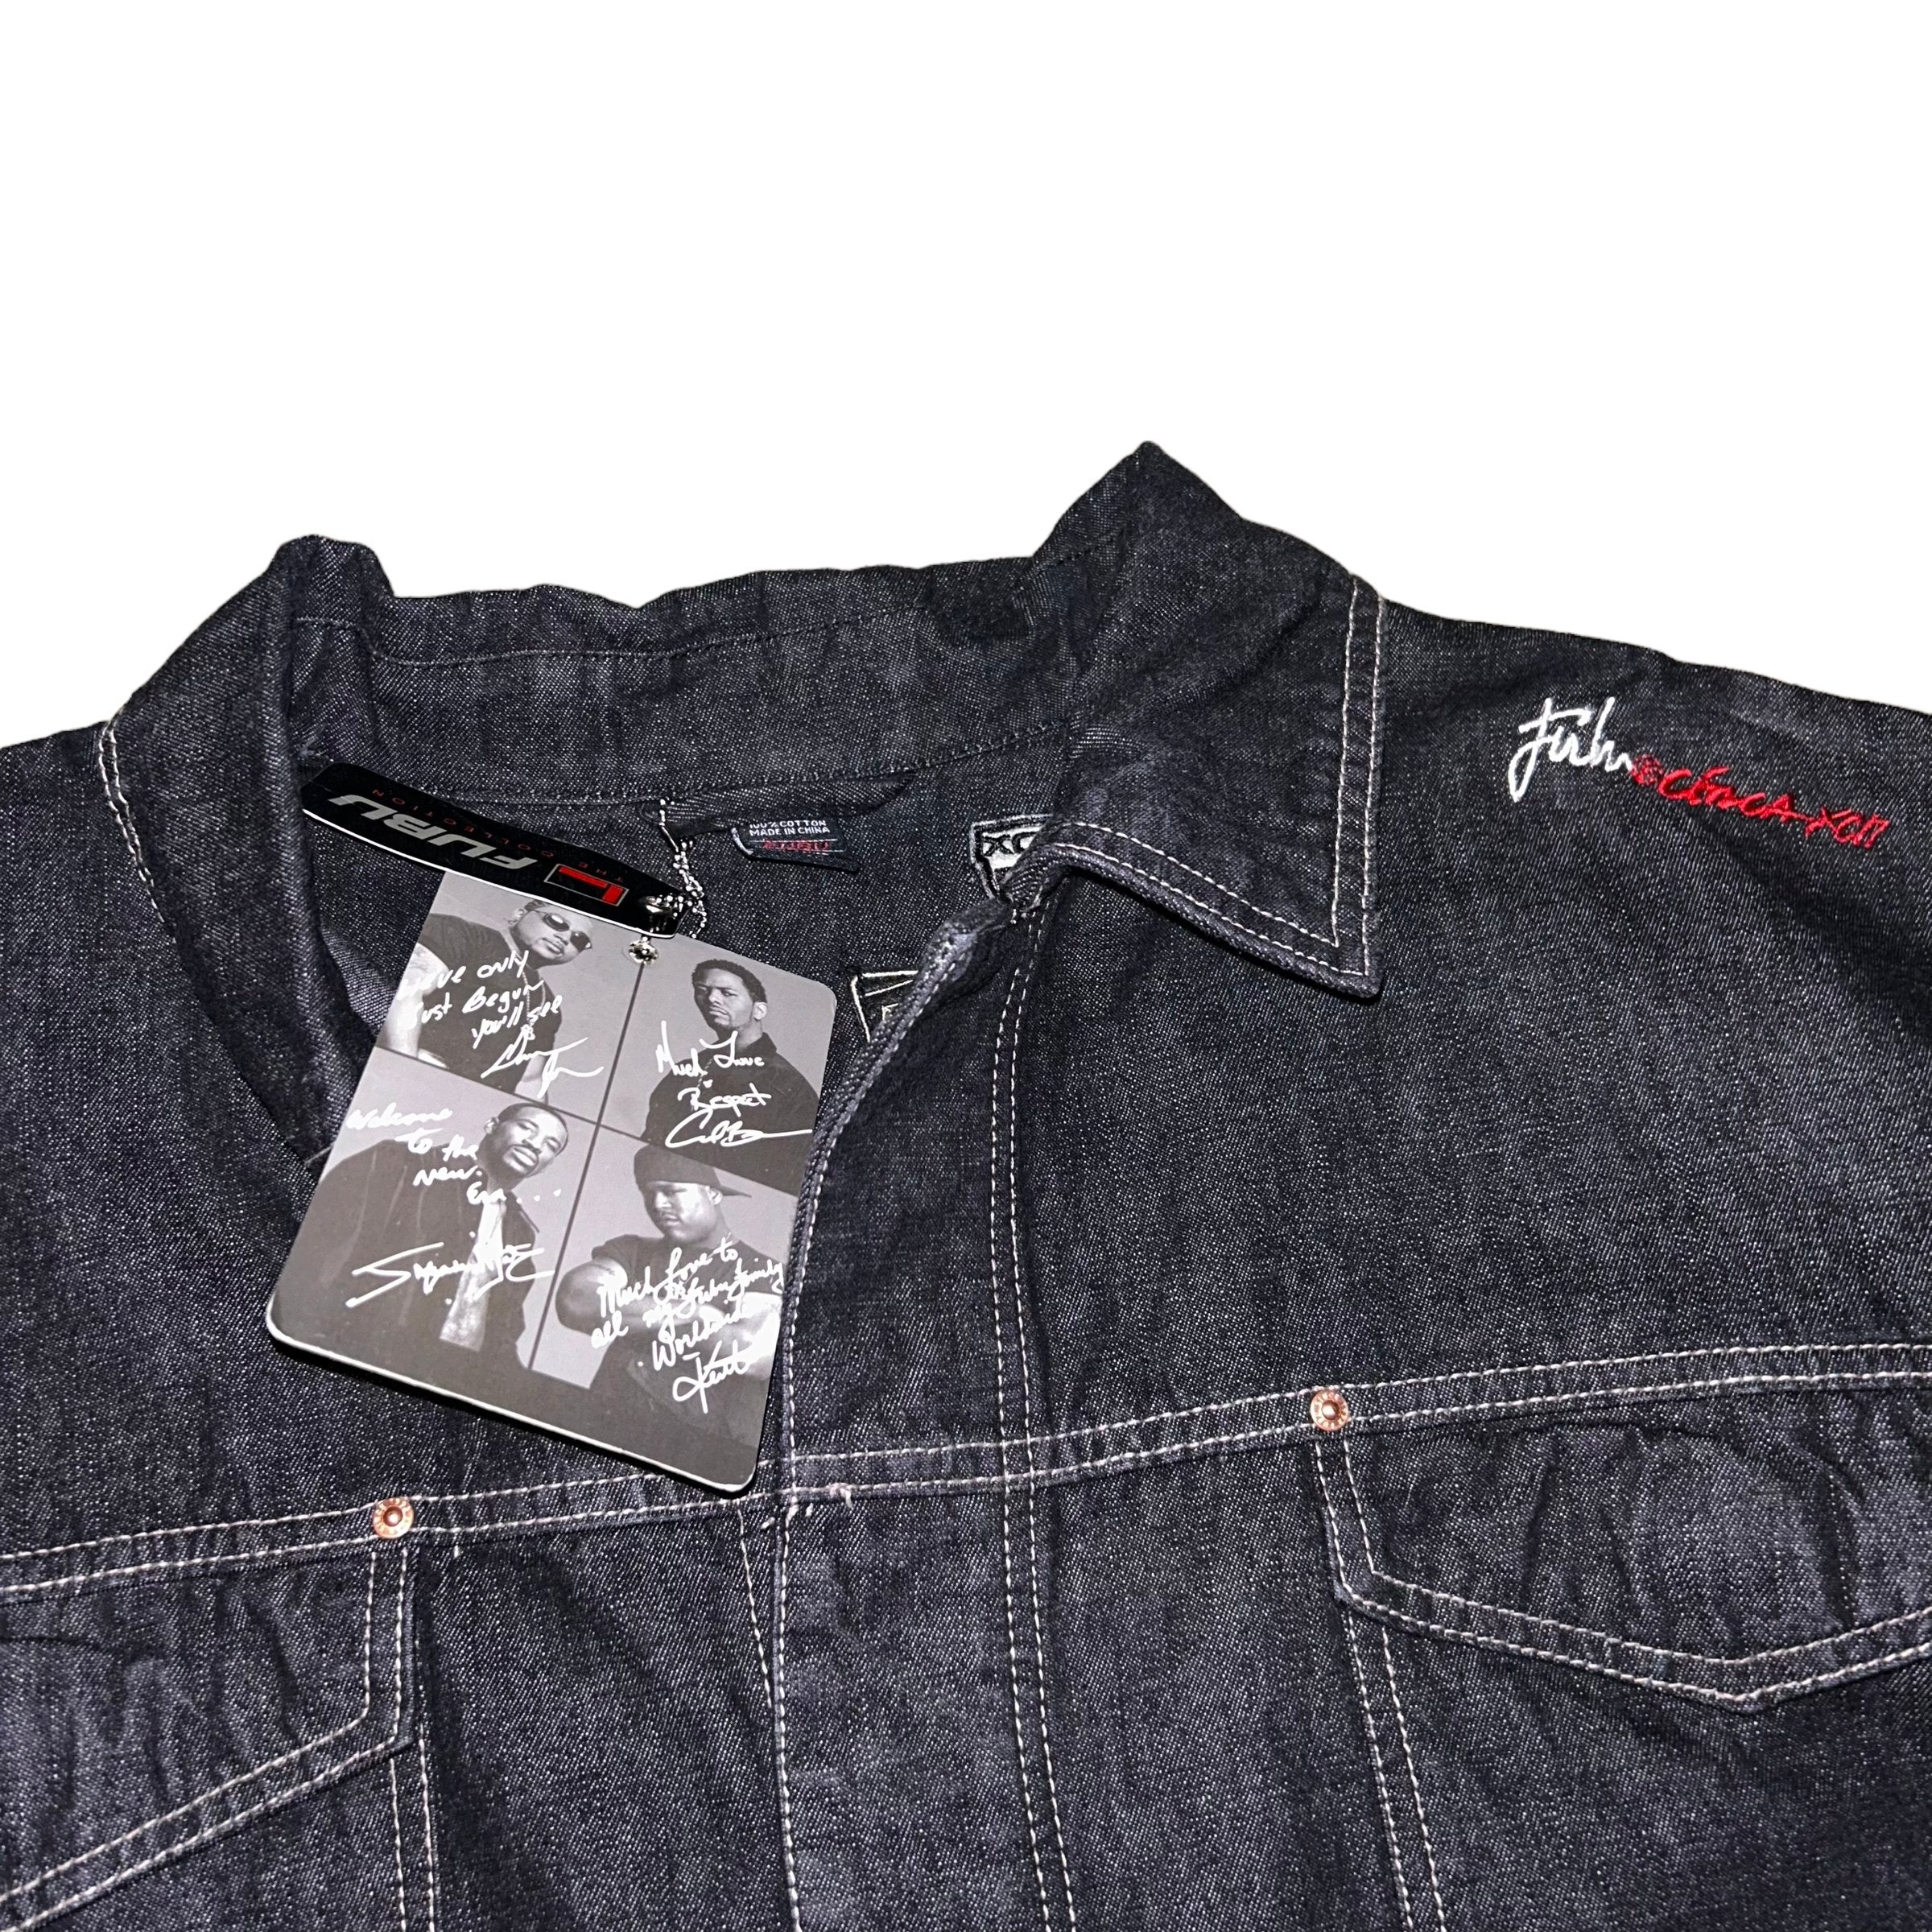 Giacca in jeans FUBU vintage (XL) - oldstyleclothing